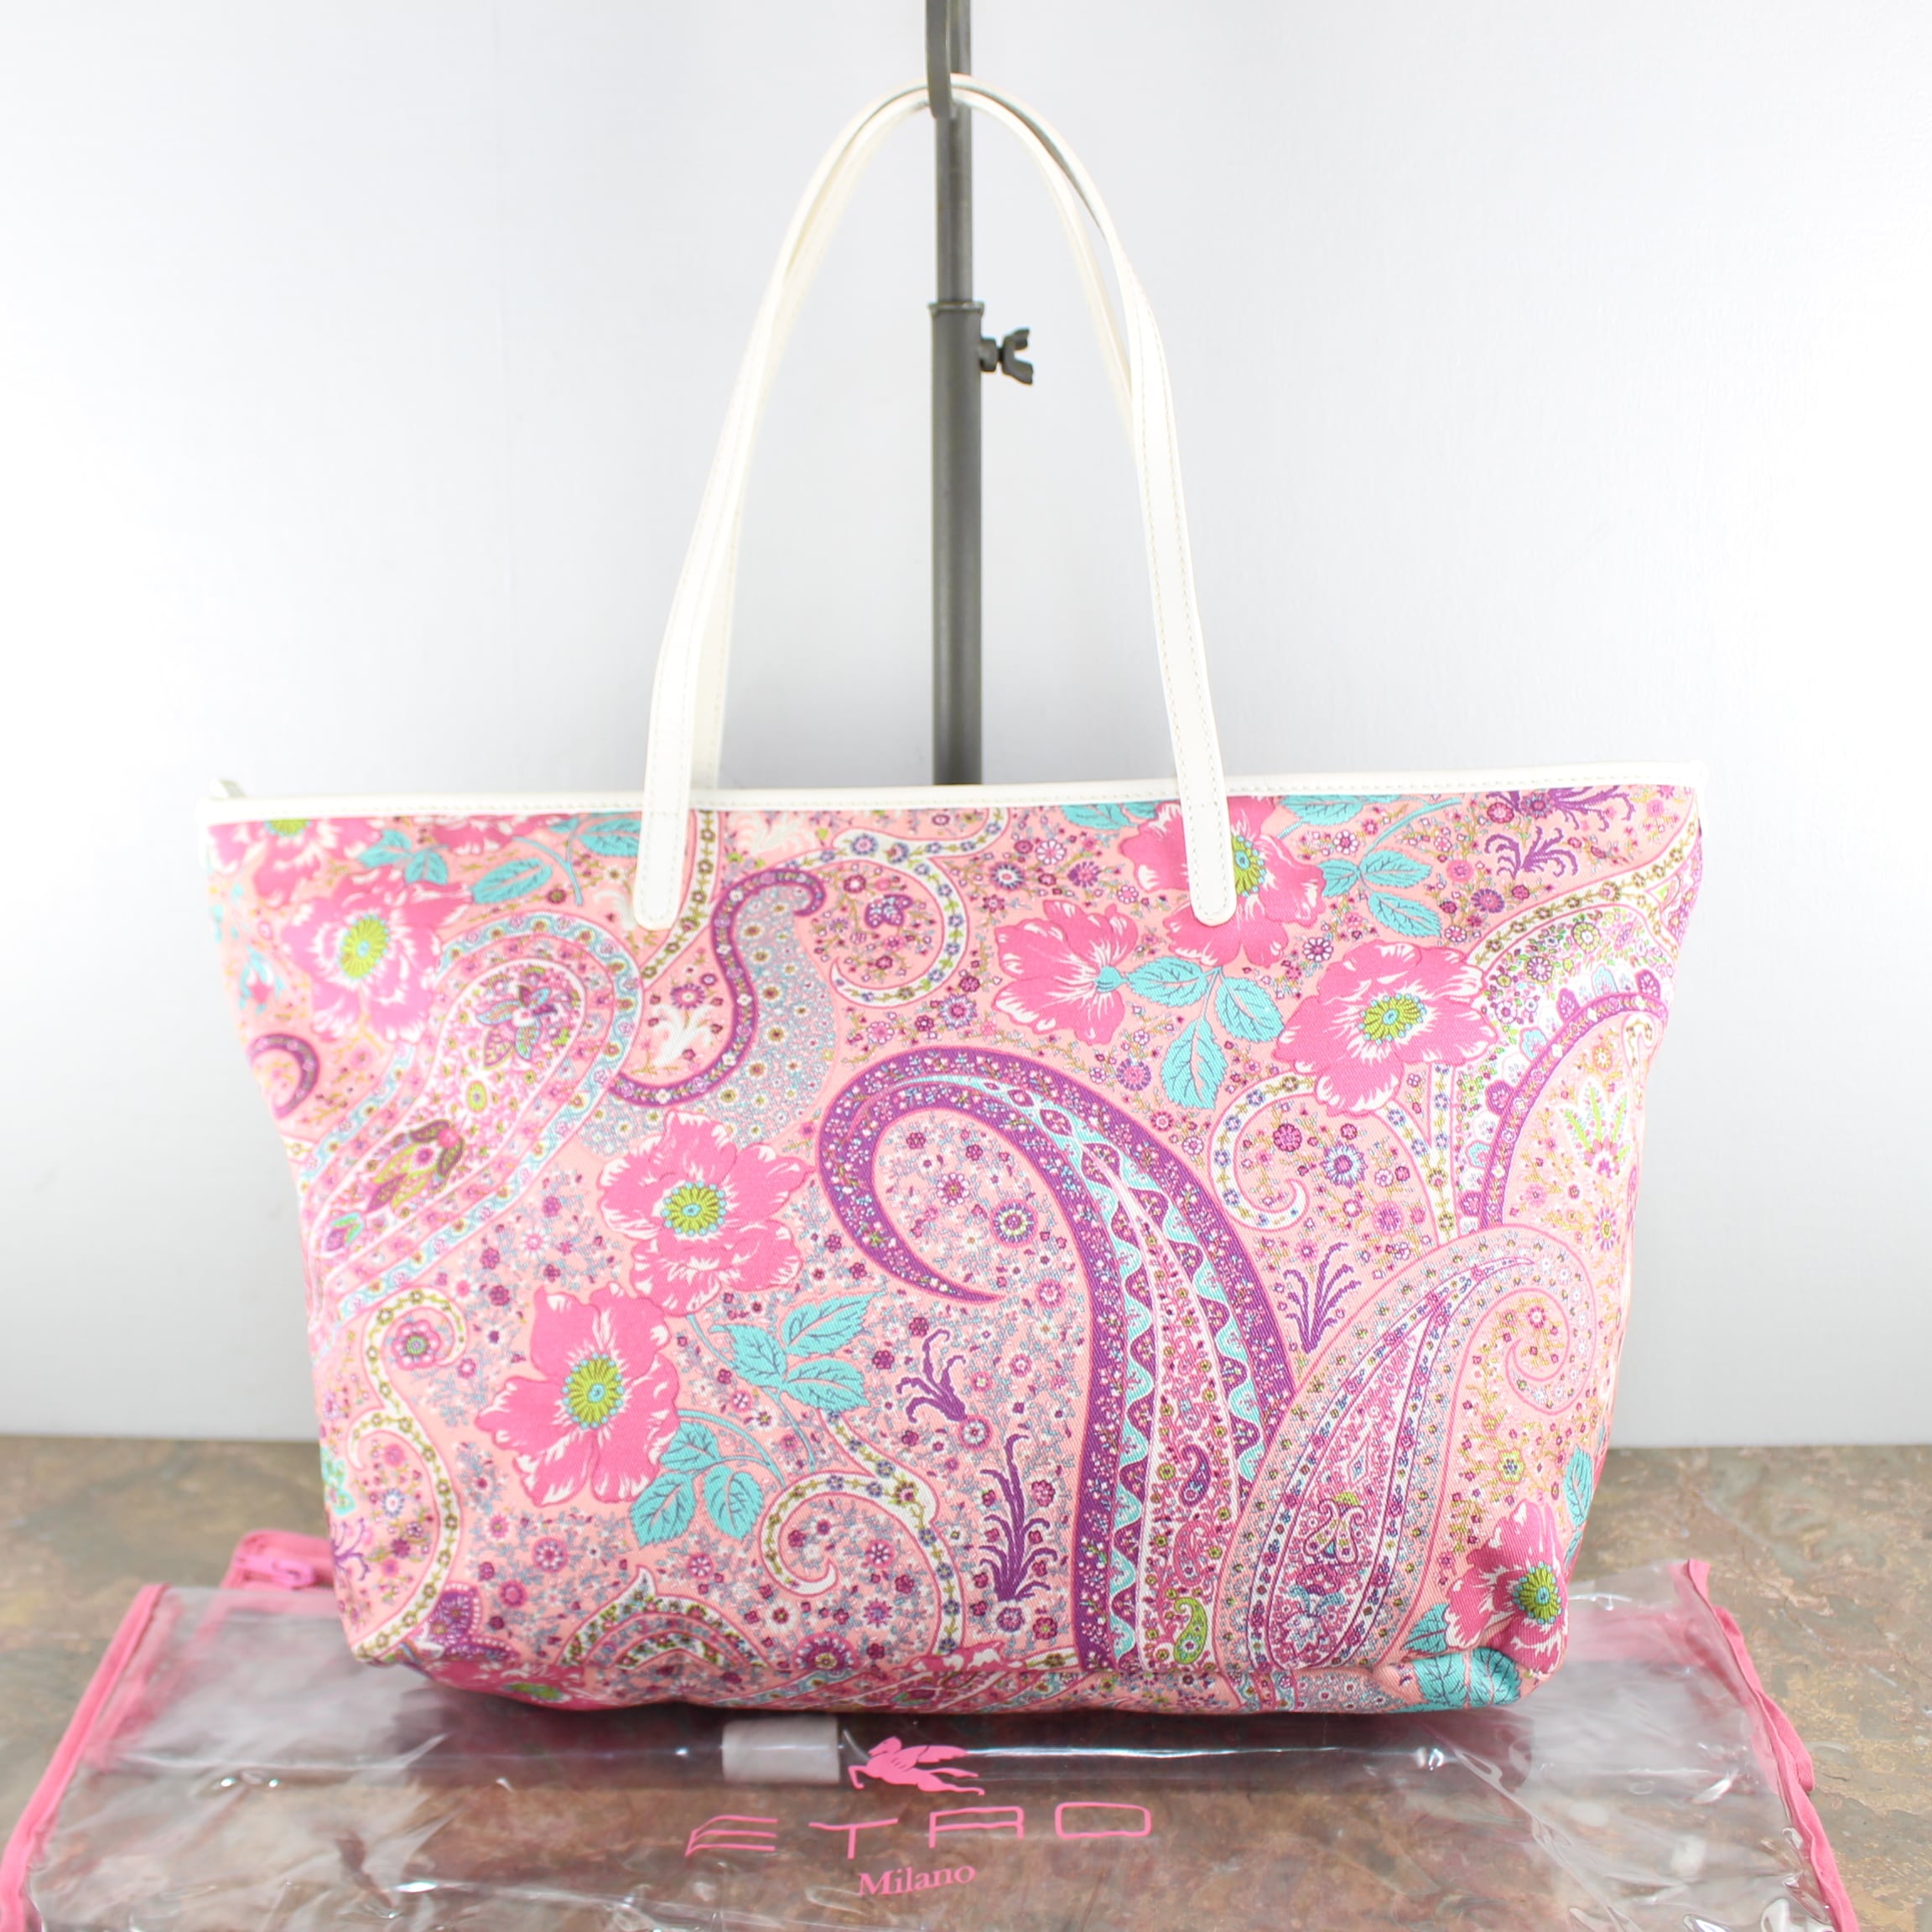 ETRO PAISLEY PATTERNED TOTE BAG MADE IN ITALYエトロペイズリー柄